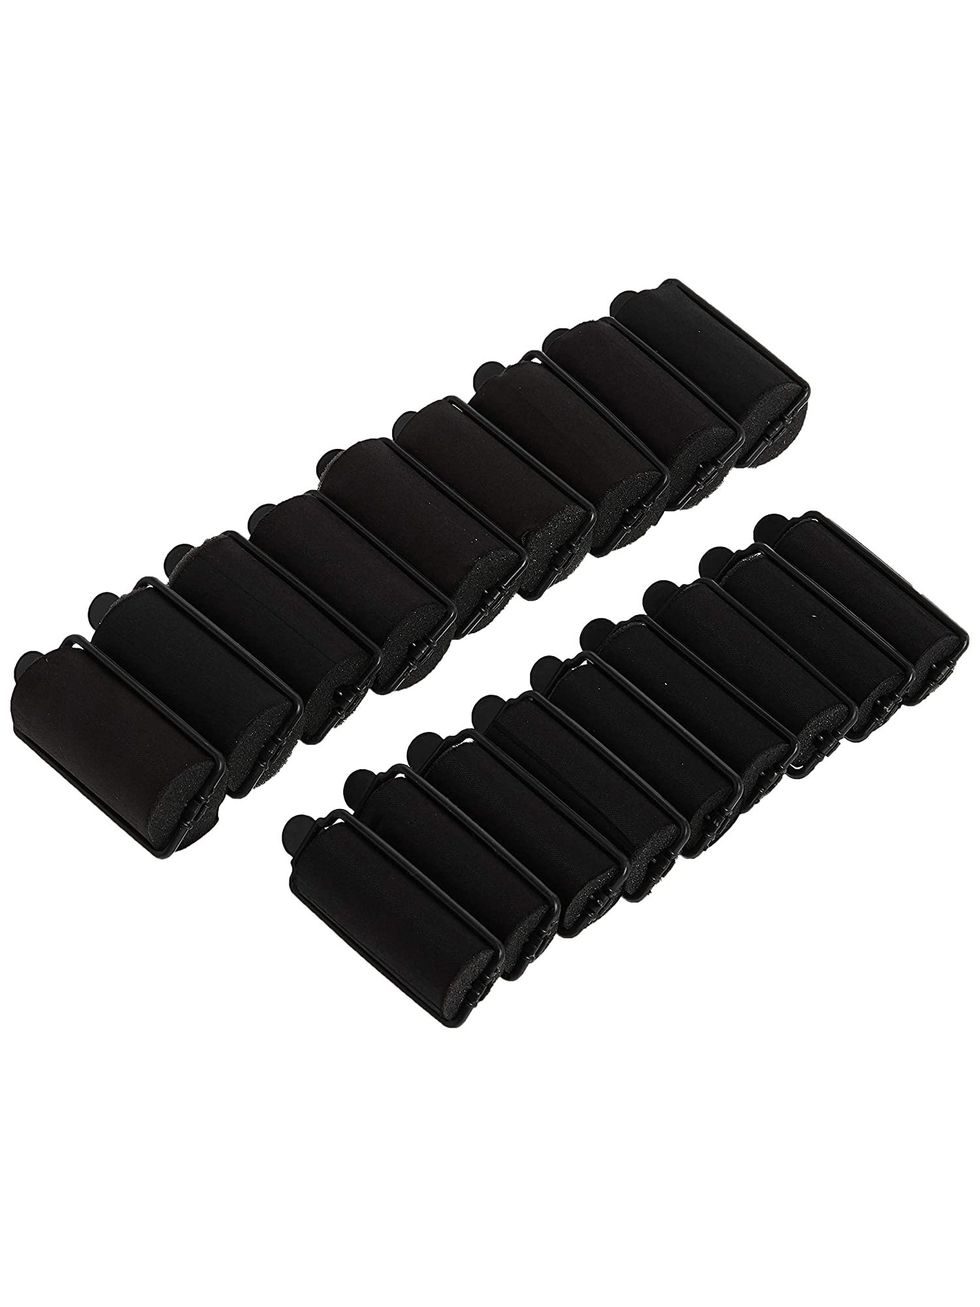 Satin-Covered Rollers, 18 Piece